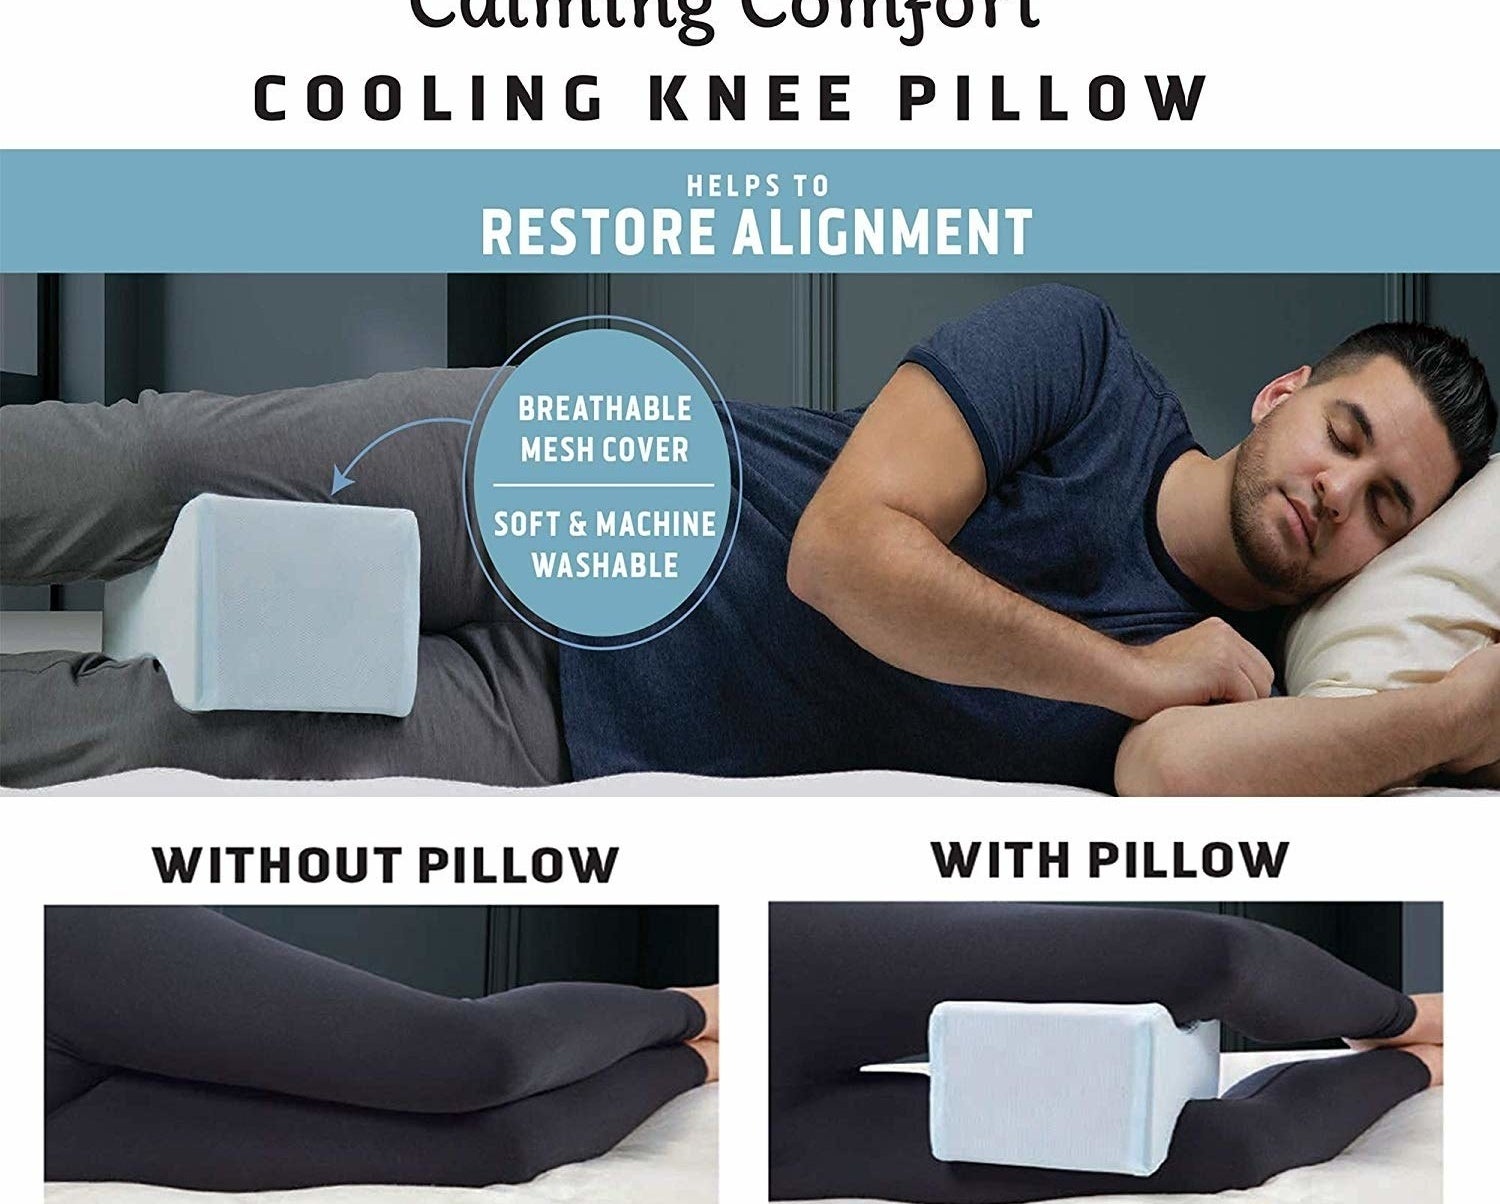 person with perfect alignment while using the calming comfort knee pillow